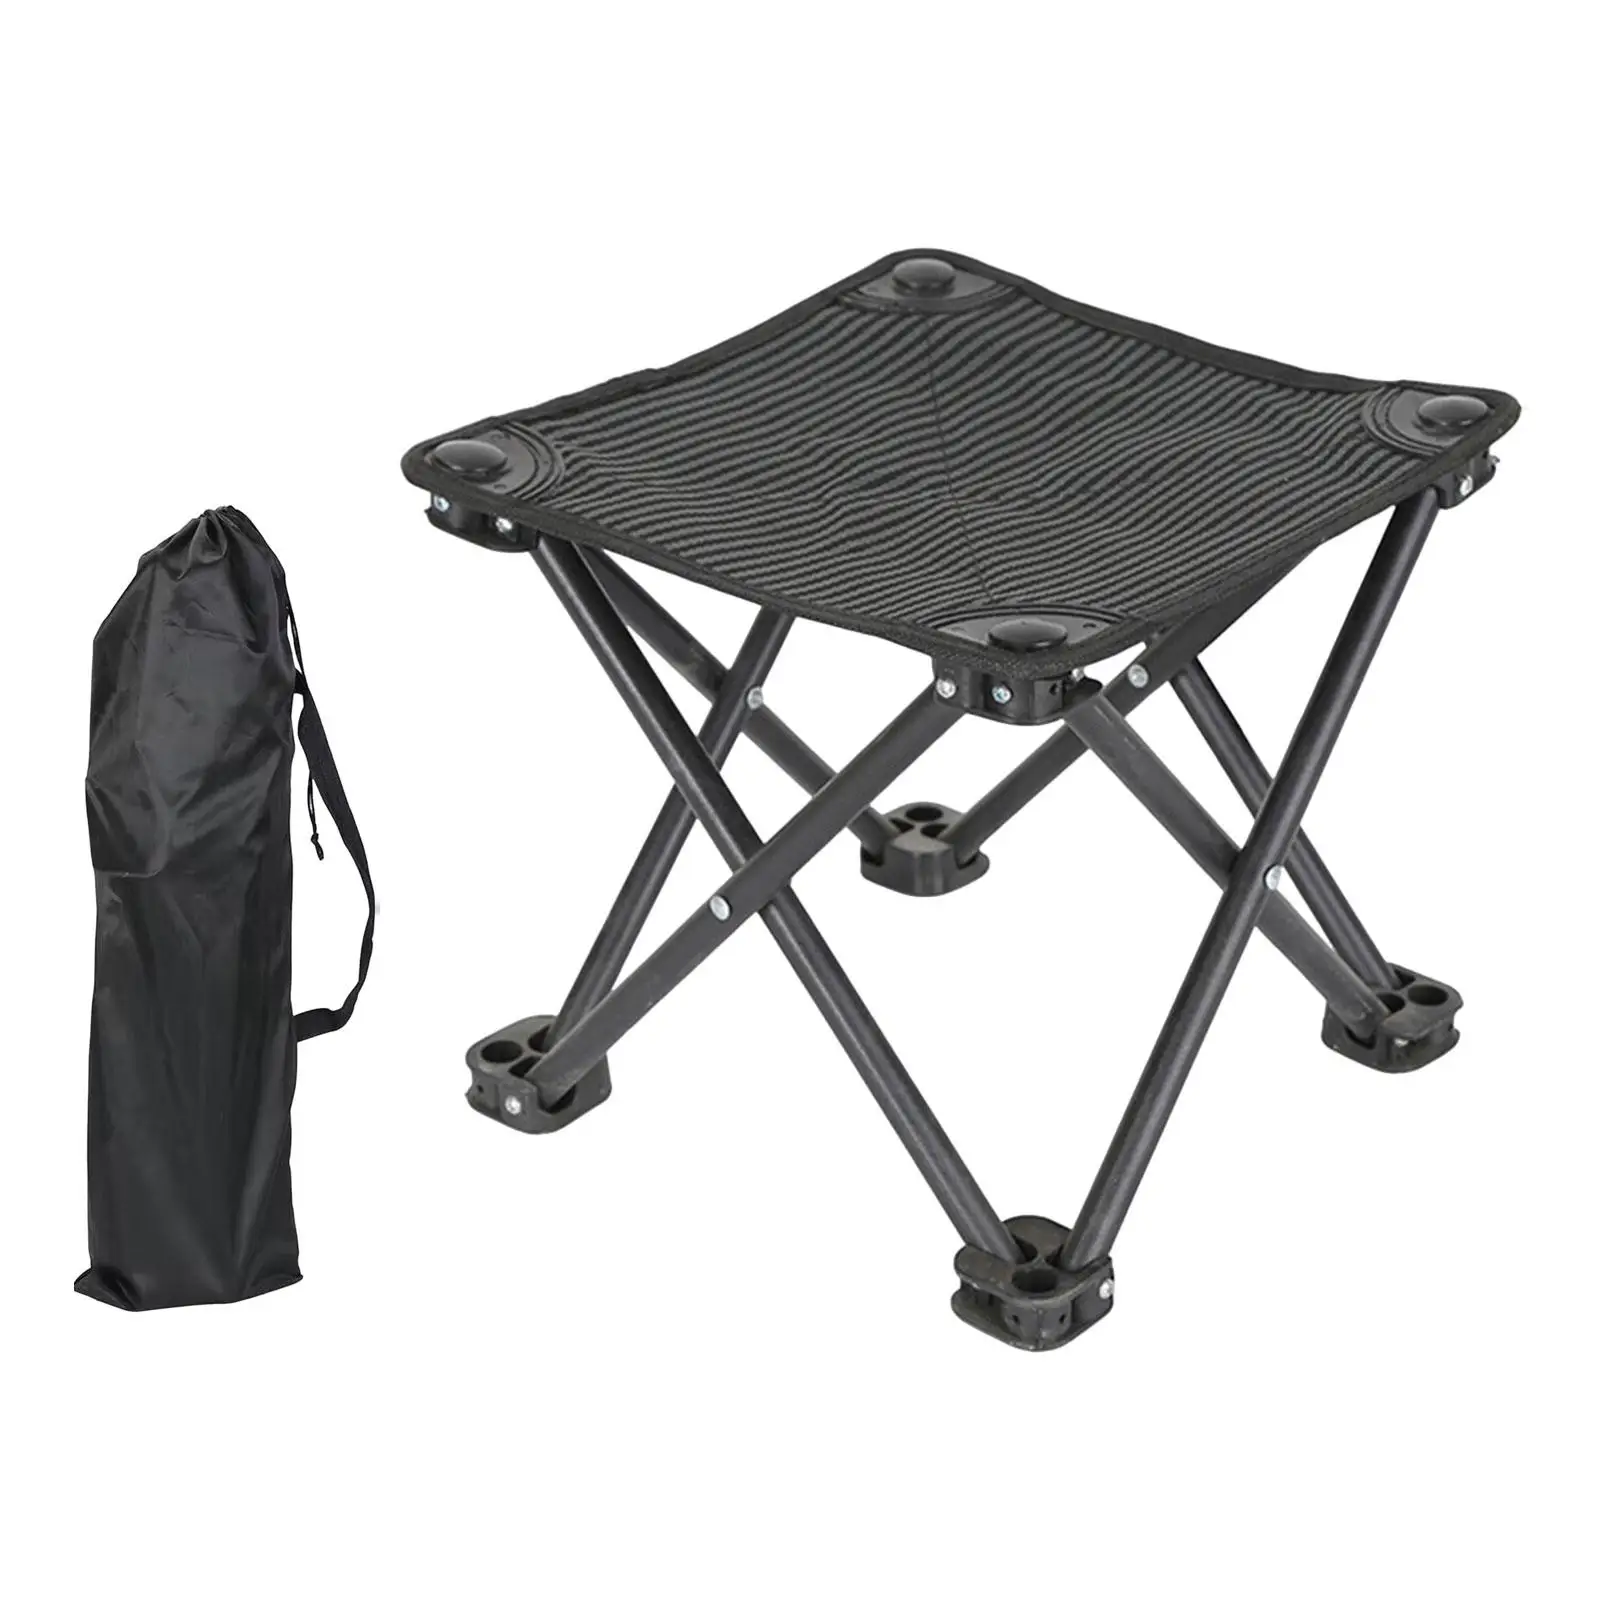 Portable Folding Stool Wear Resistant Small Chair for Adults Foldable Camping Stool for Outdoor BBQ Beach Traveling Backpacking